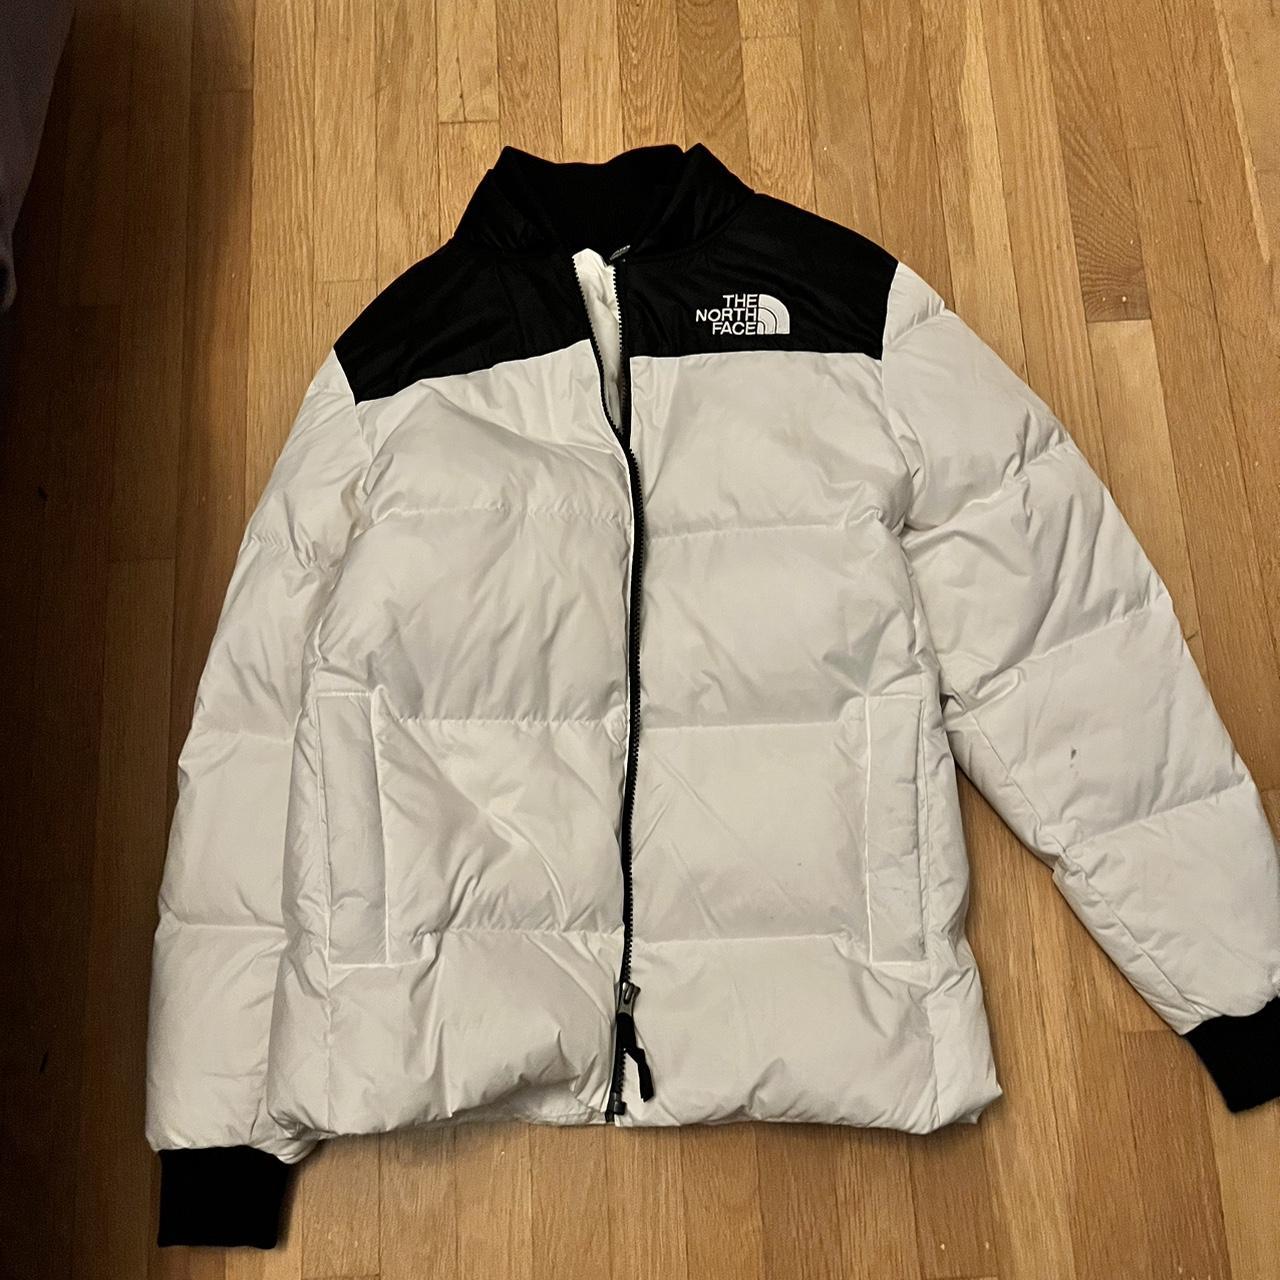 BLACK AND WHITE NORTH FACE PUFFER - Depop